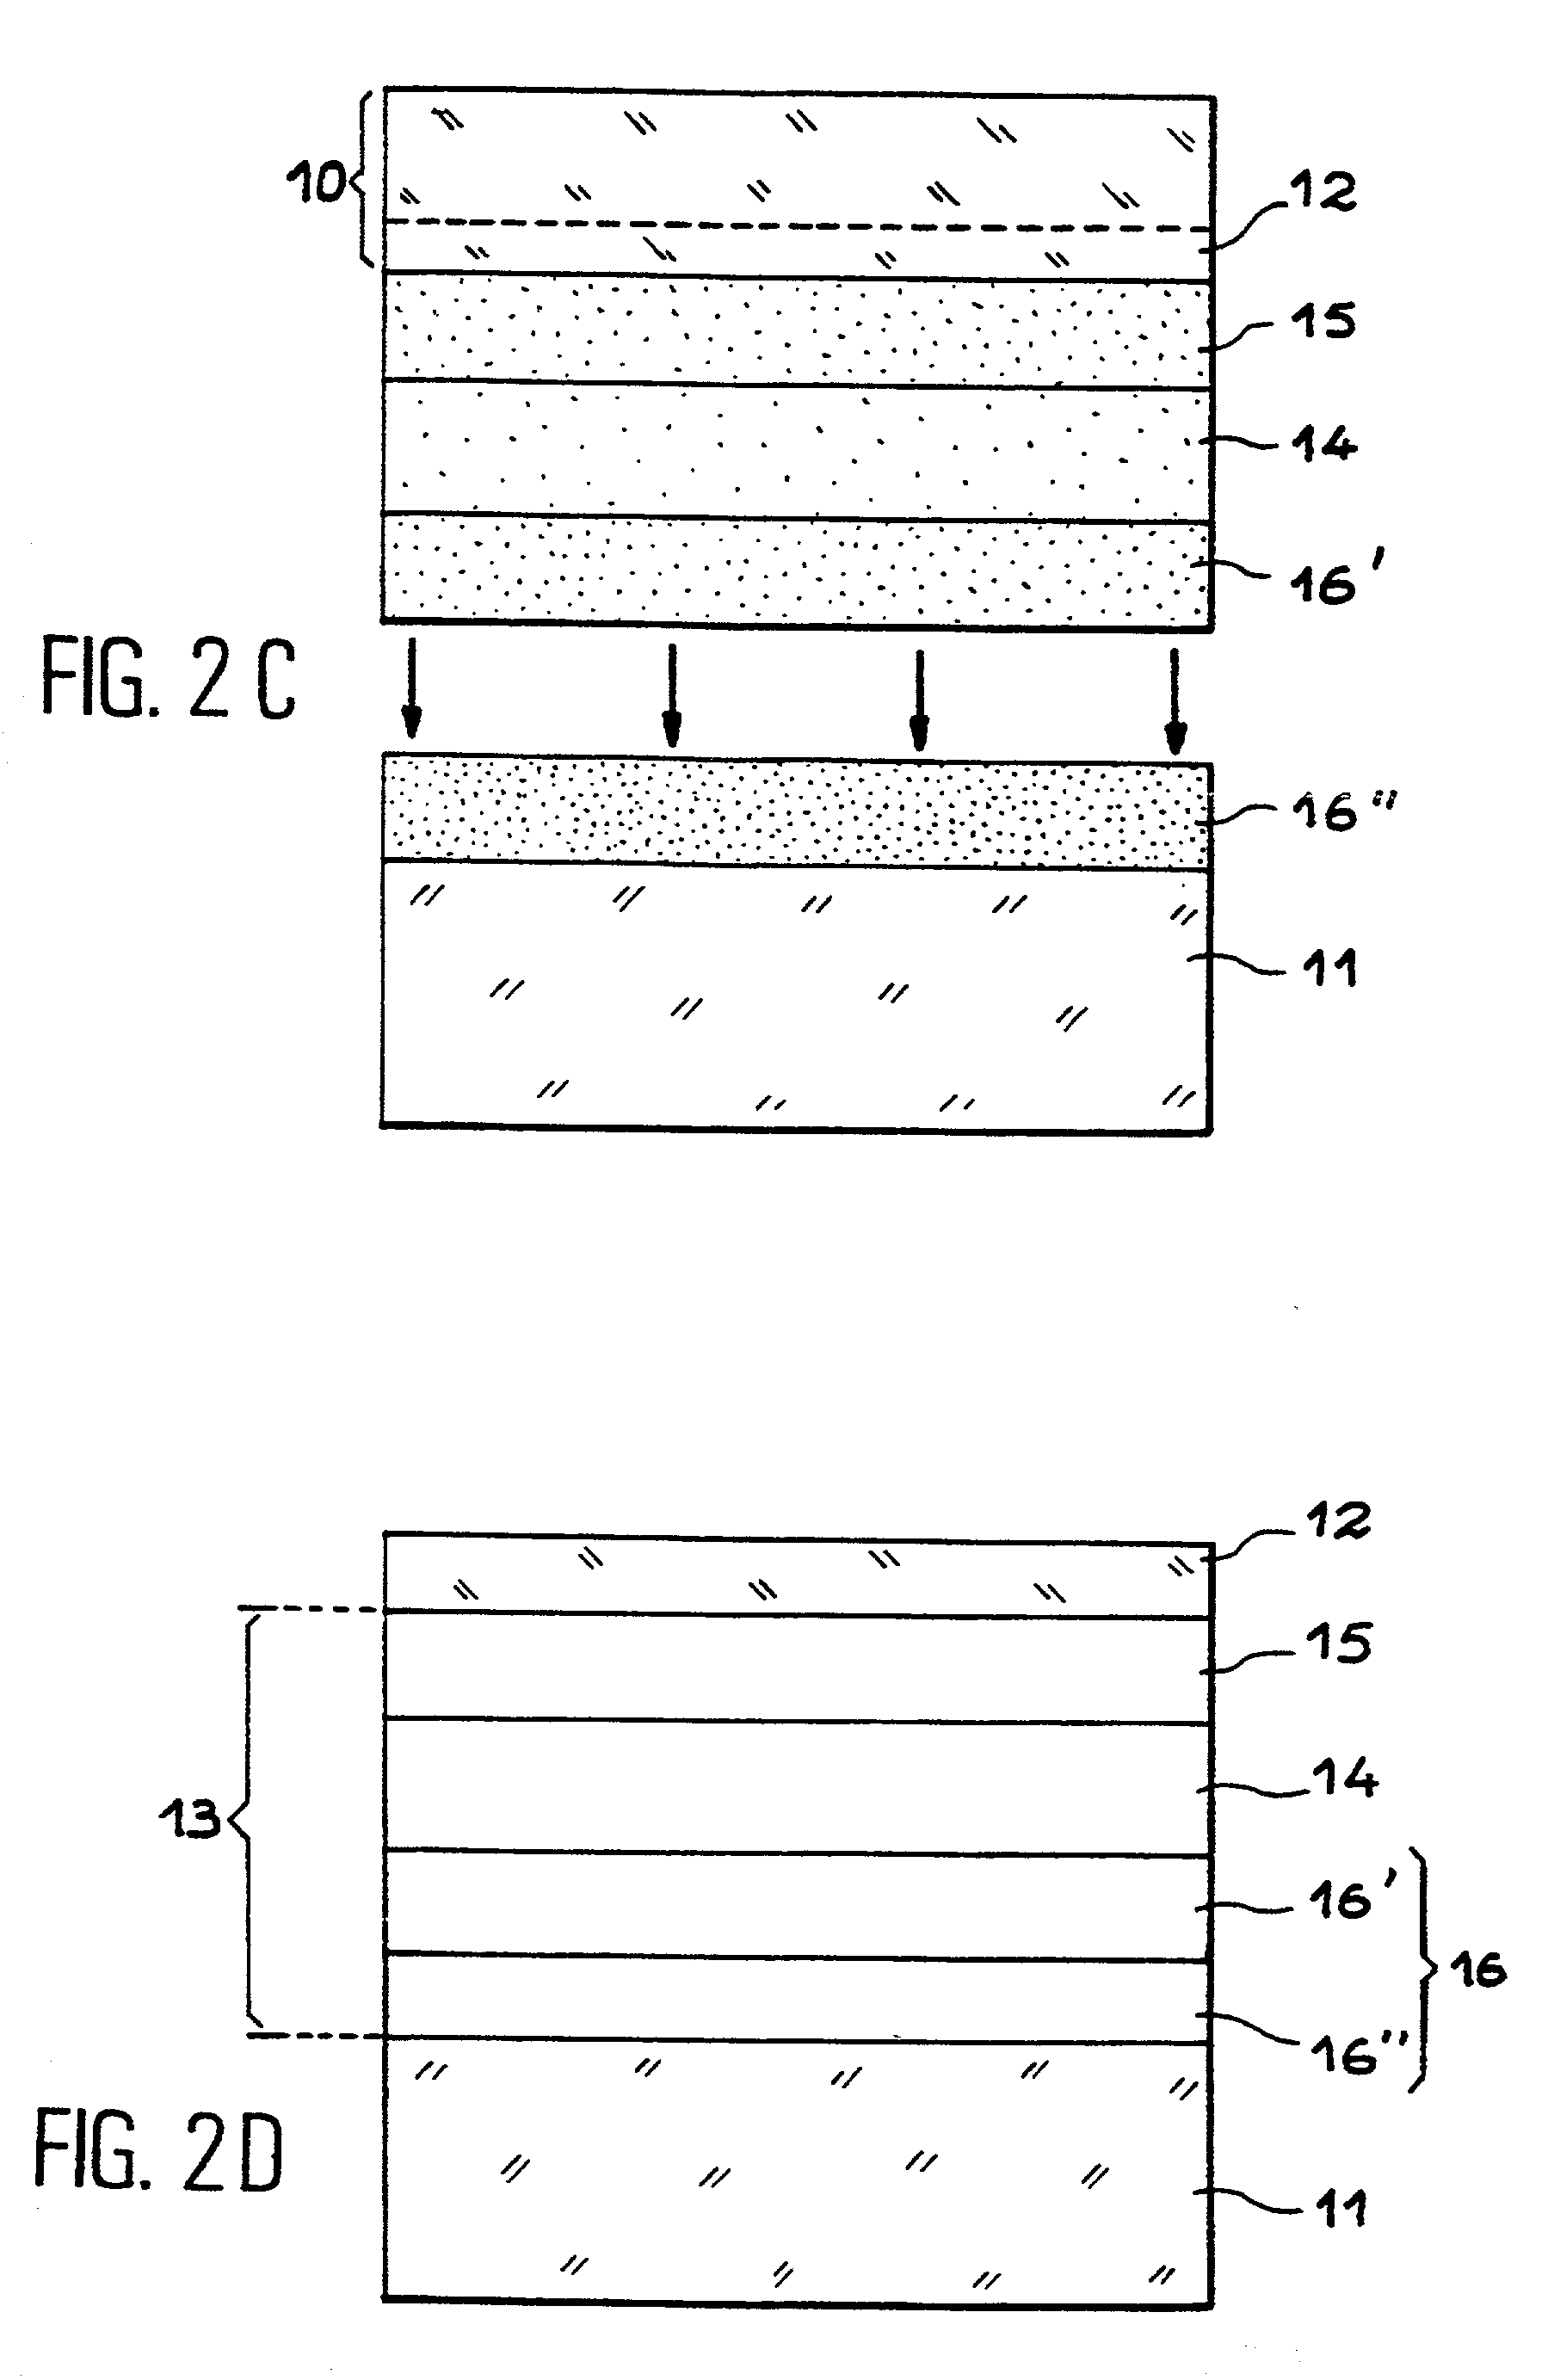 Thin layer semi-conductor structure comprising a heat distribution layer